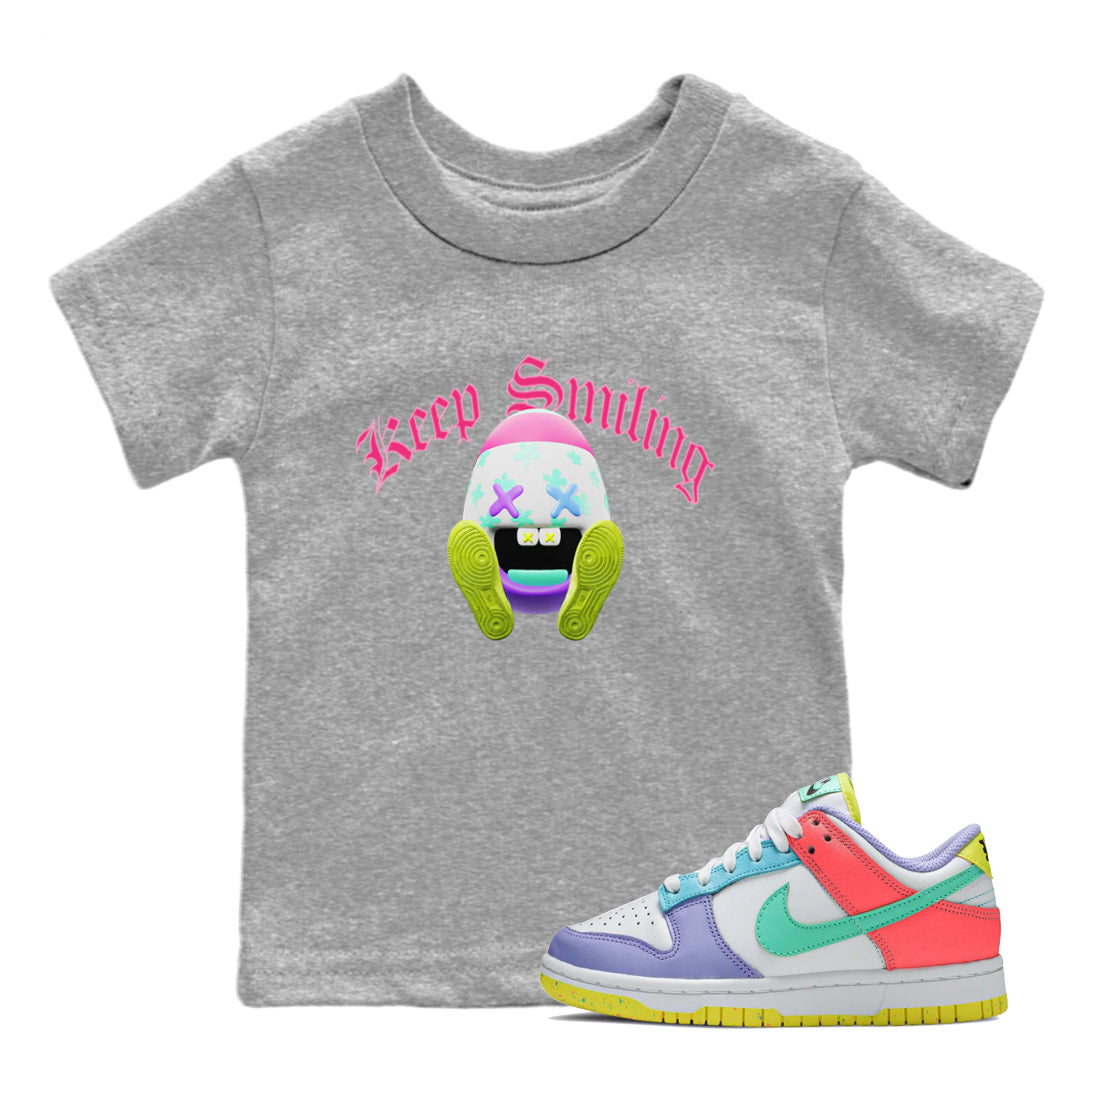 Dunk Easter Candy Sneaker Tees Drip Gear Zone Keep Smiling Sneaker Tees Nike Easter Shirt Kids Shirts Heather Grey 1